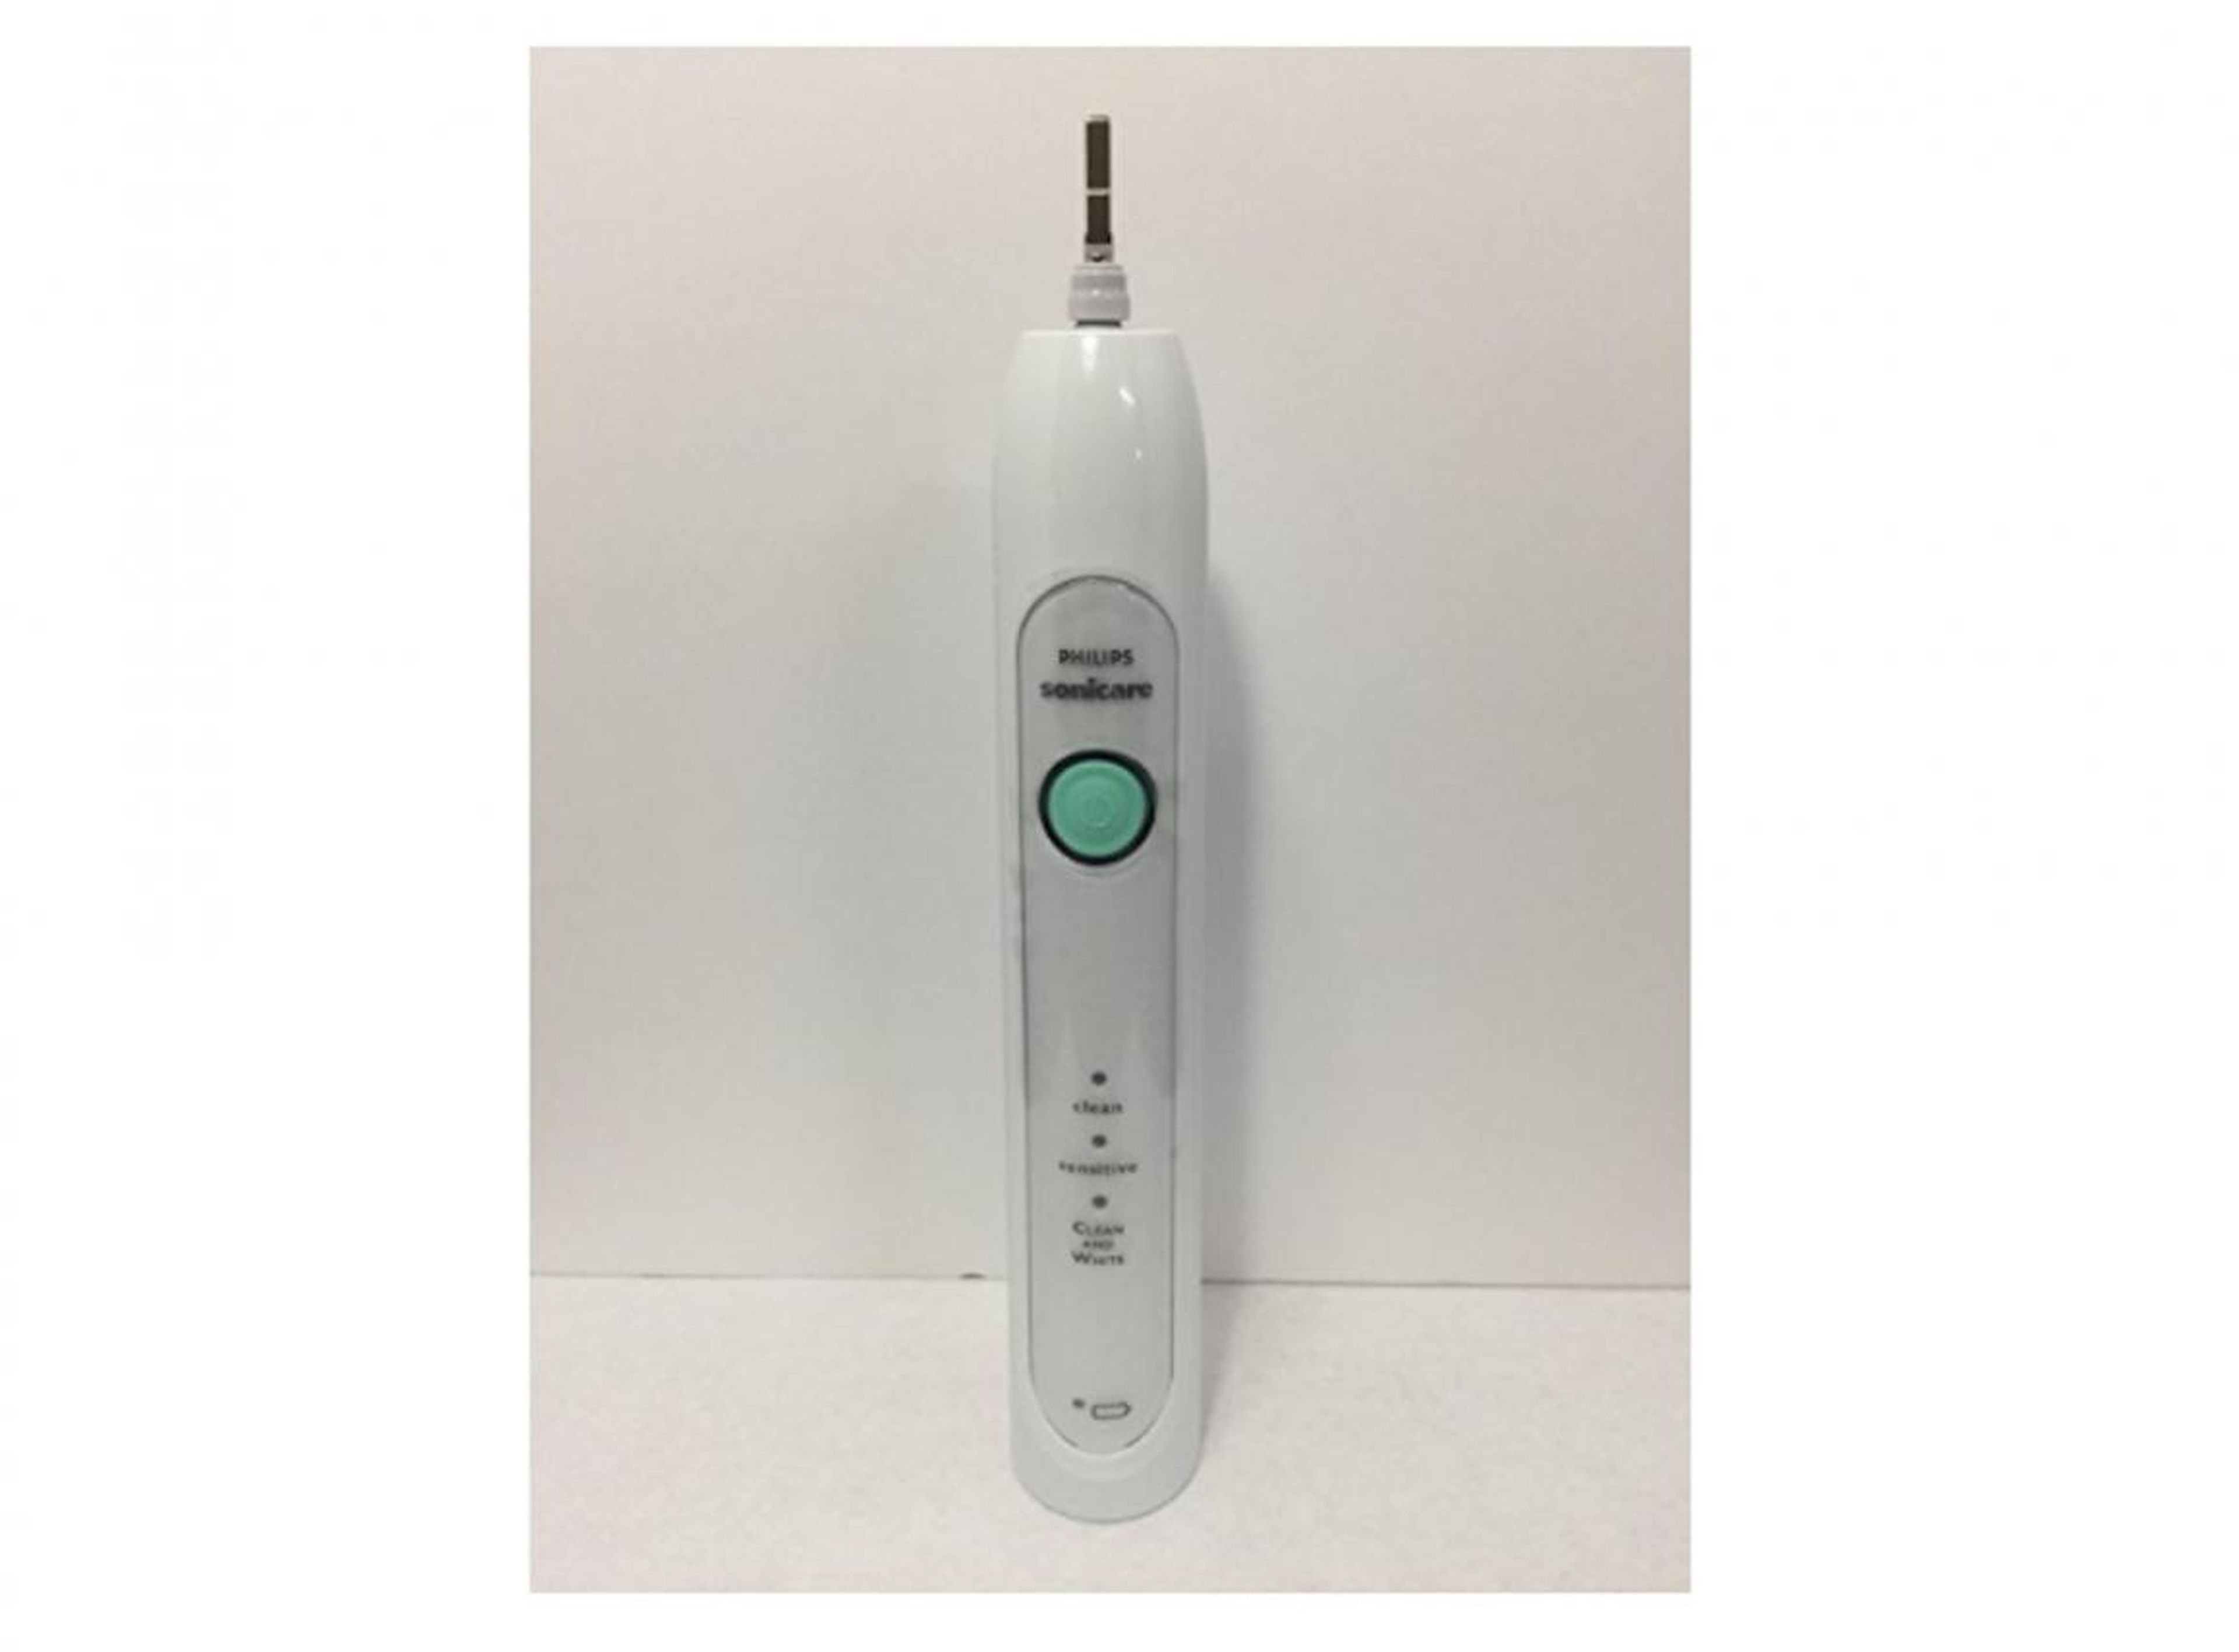 China: Health and beauty were a focus for shoppers in China, with <a href="https://amzn.to/2JDKAMU">Philips Sonicare Healthy White HX6730</a> Toothbrushes and <a href="https://amzn.to/2mqgnaM">Braun Digital Ear Thermometers</a>